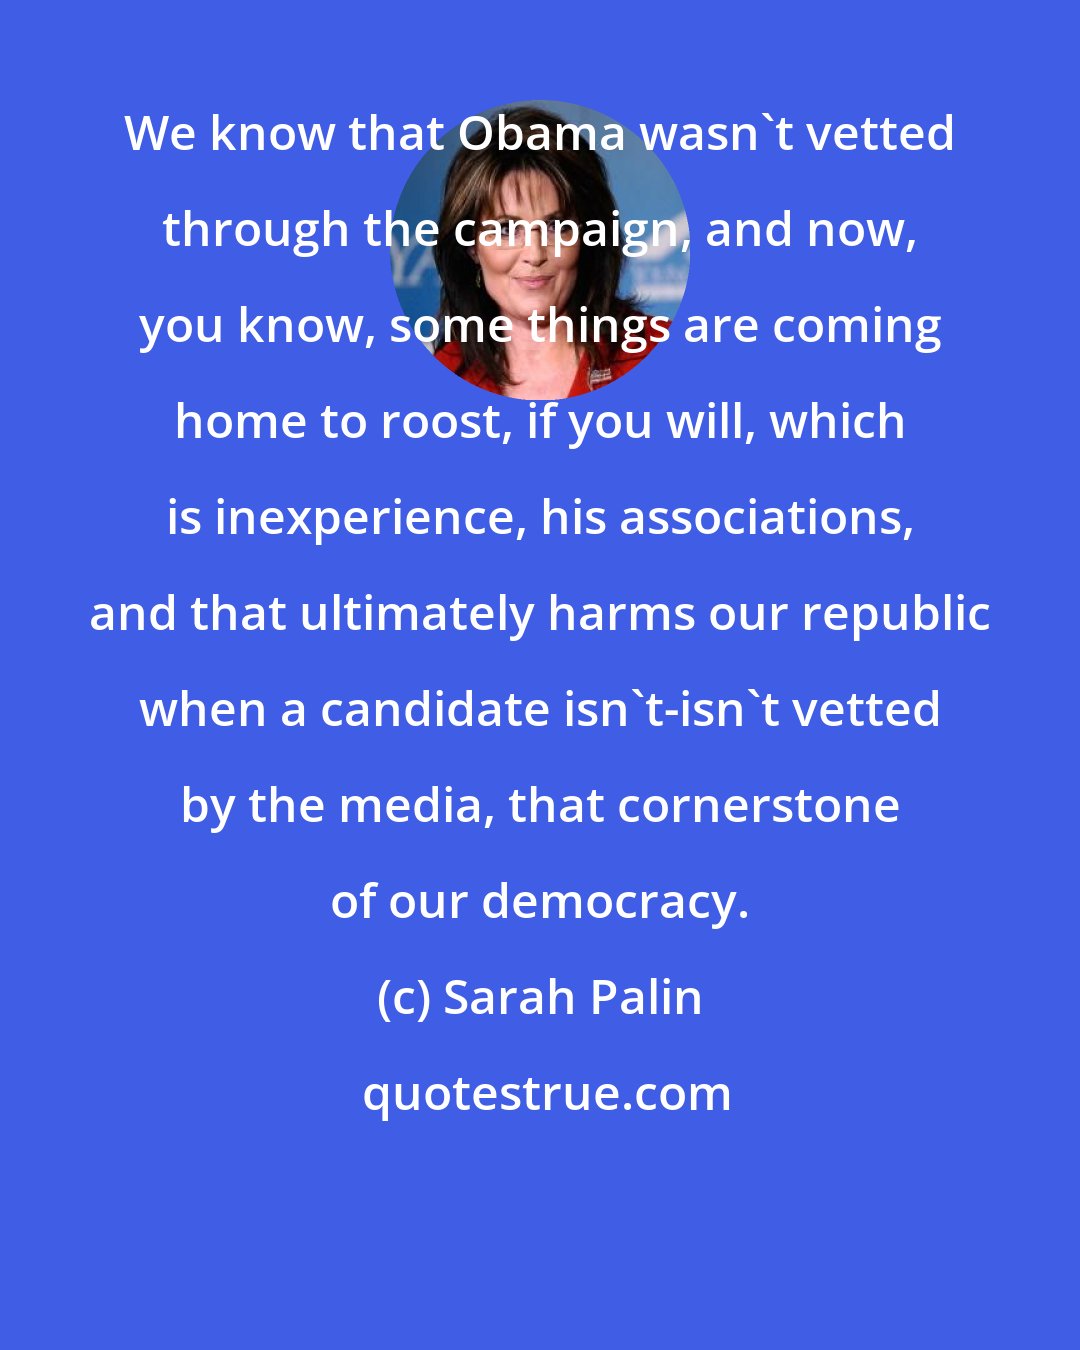 Sarah Palin: We know that Obama wasn't vetted through the campaign, and now, you know, some things are coming home to roost, if you will, which is inexperience, his associations, and that ultimately harms our republic when a candidate isn't-isn't vetted by the media, that cornerstone of our democracy.